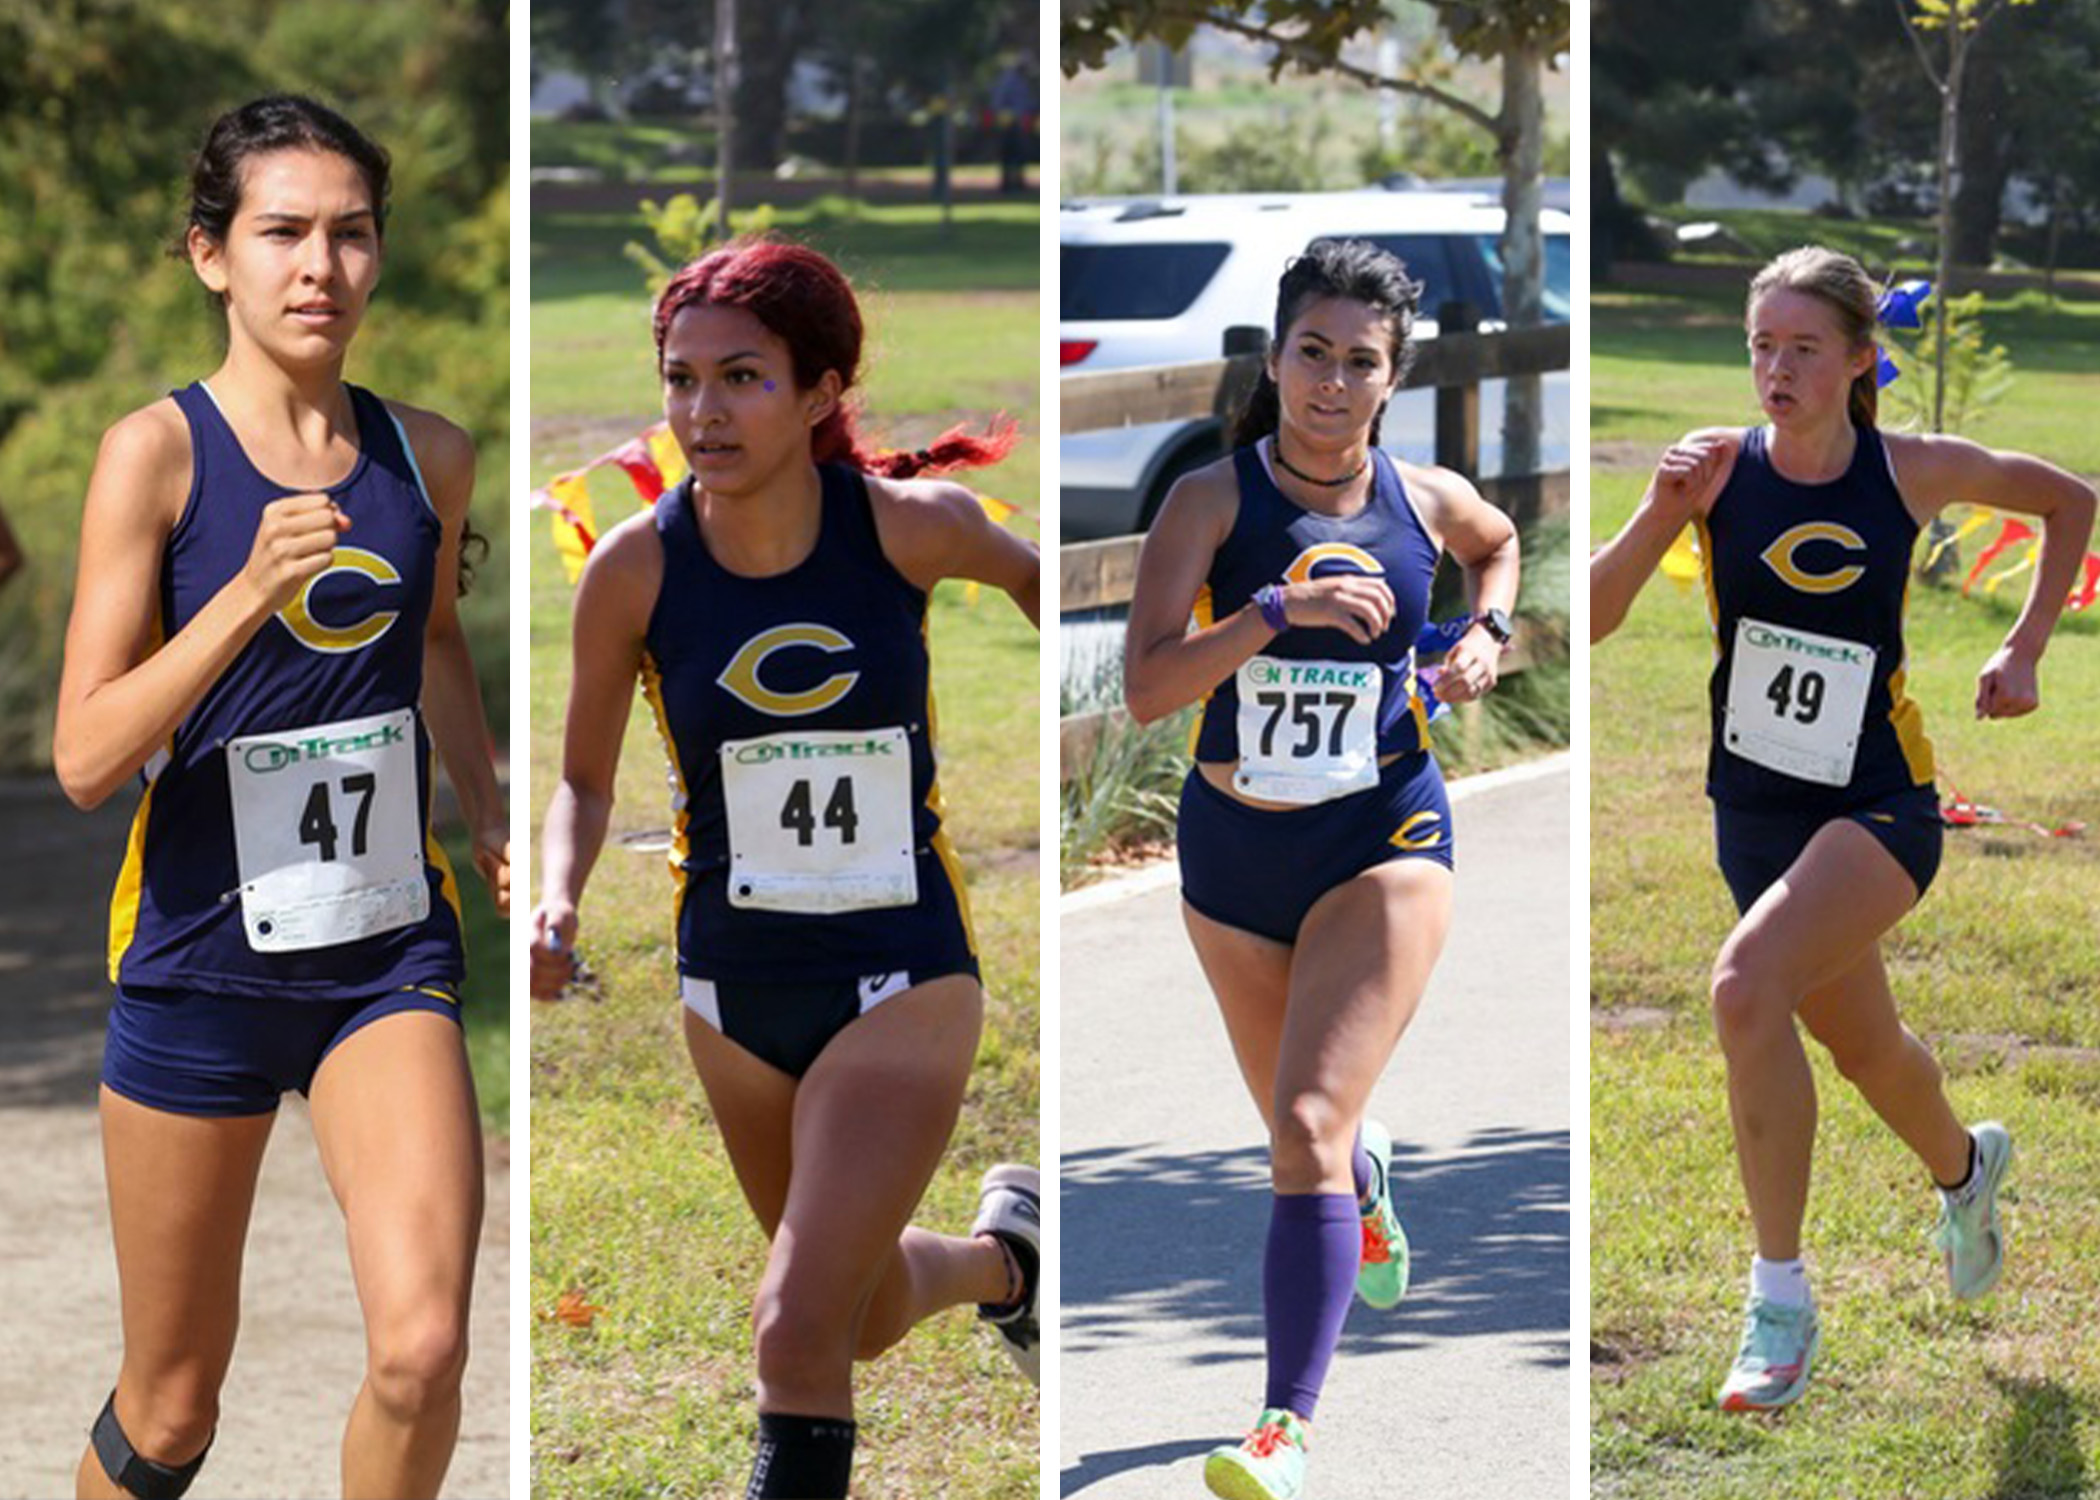 (from left to right CCCAA Women's Cross Country Individual State Champion Danielle Salcedo was named the Western State Conference (WSC) Female Runner of the Year to headline a class of six Cougars earning all-conference honors. COC freshman Milca Osorio, sophomore Sarah Zamudio and freshman Trinity Winslow were also included among the honorees. — Jesse Muñoz/COC Sports Information